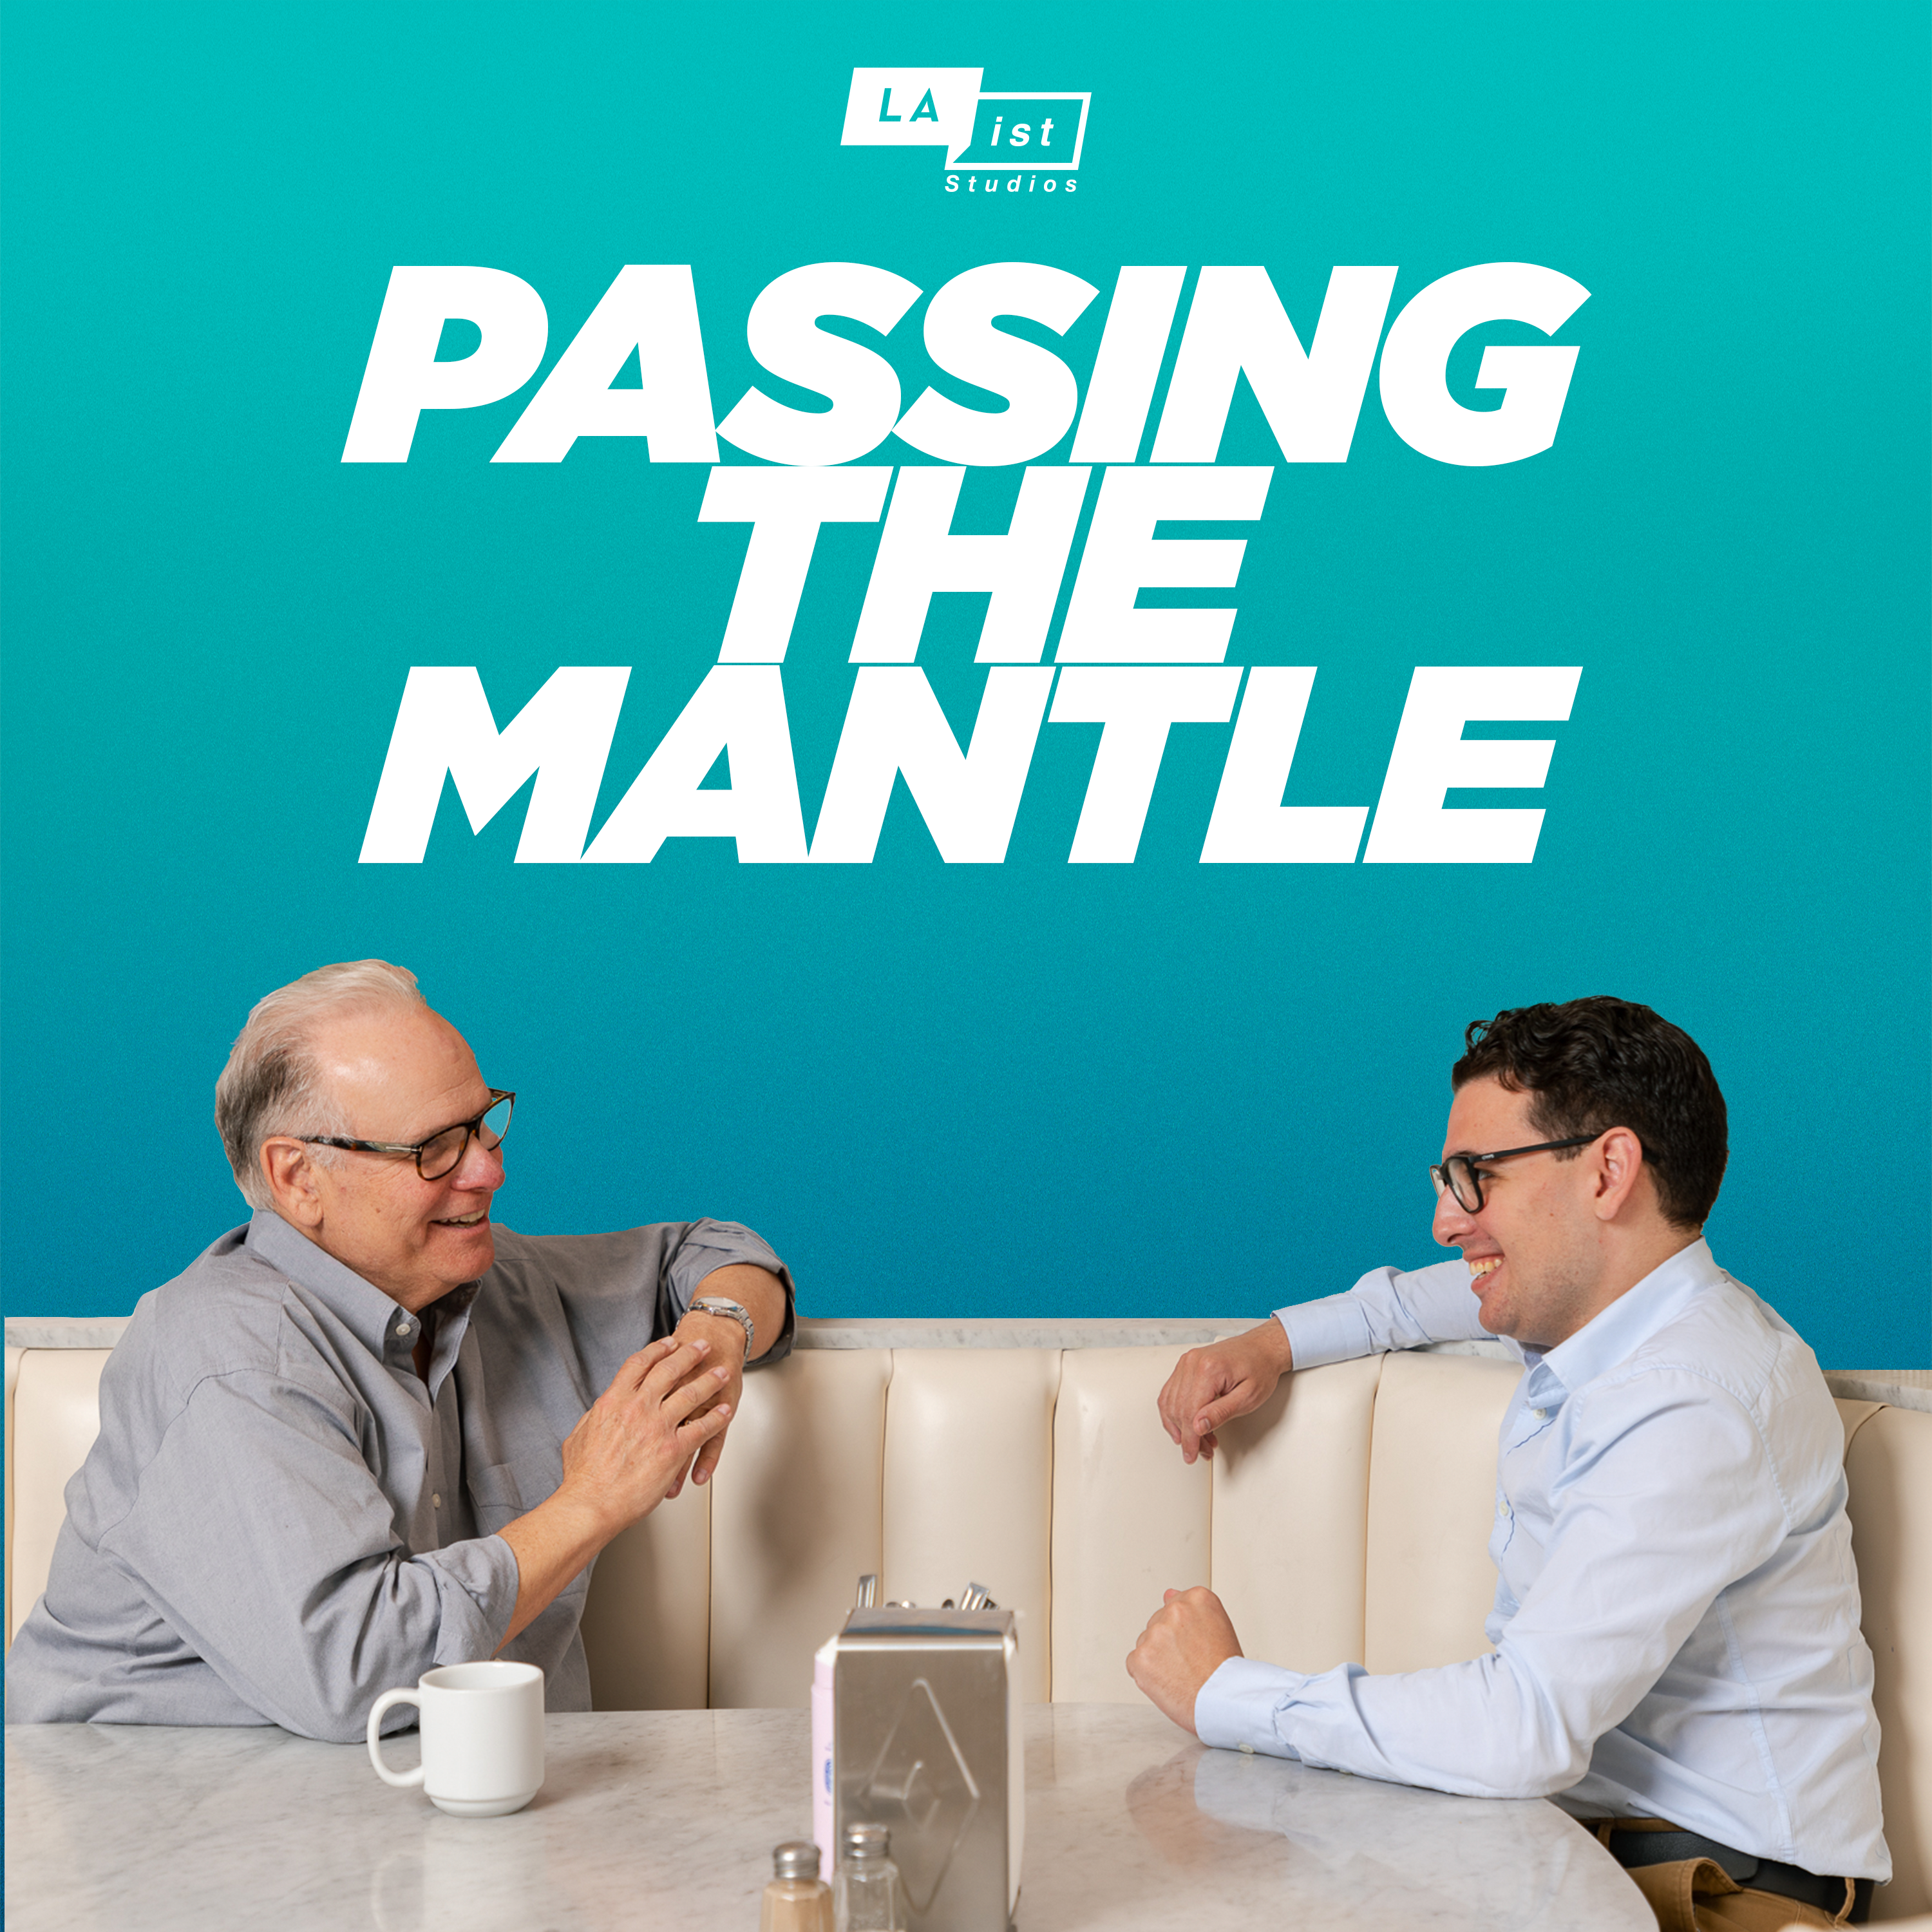 LAist Studios presents Passing The Mantle: How different is the high school experience today...really?